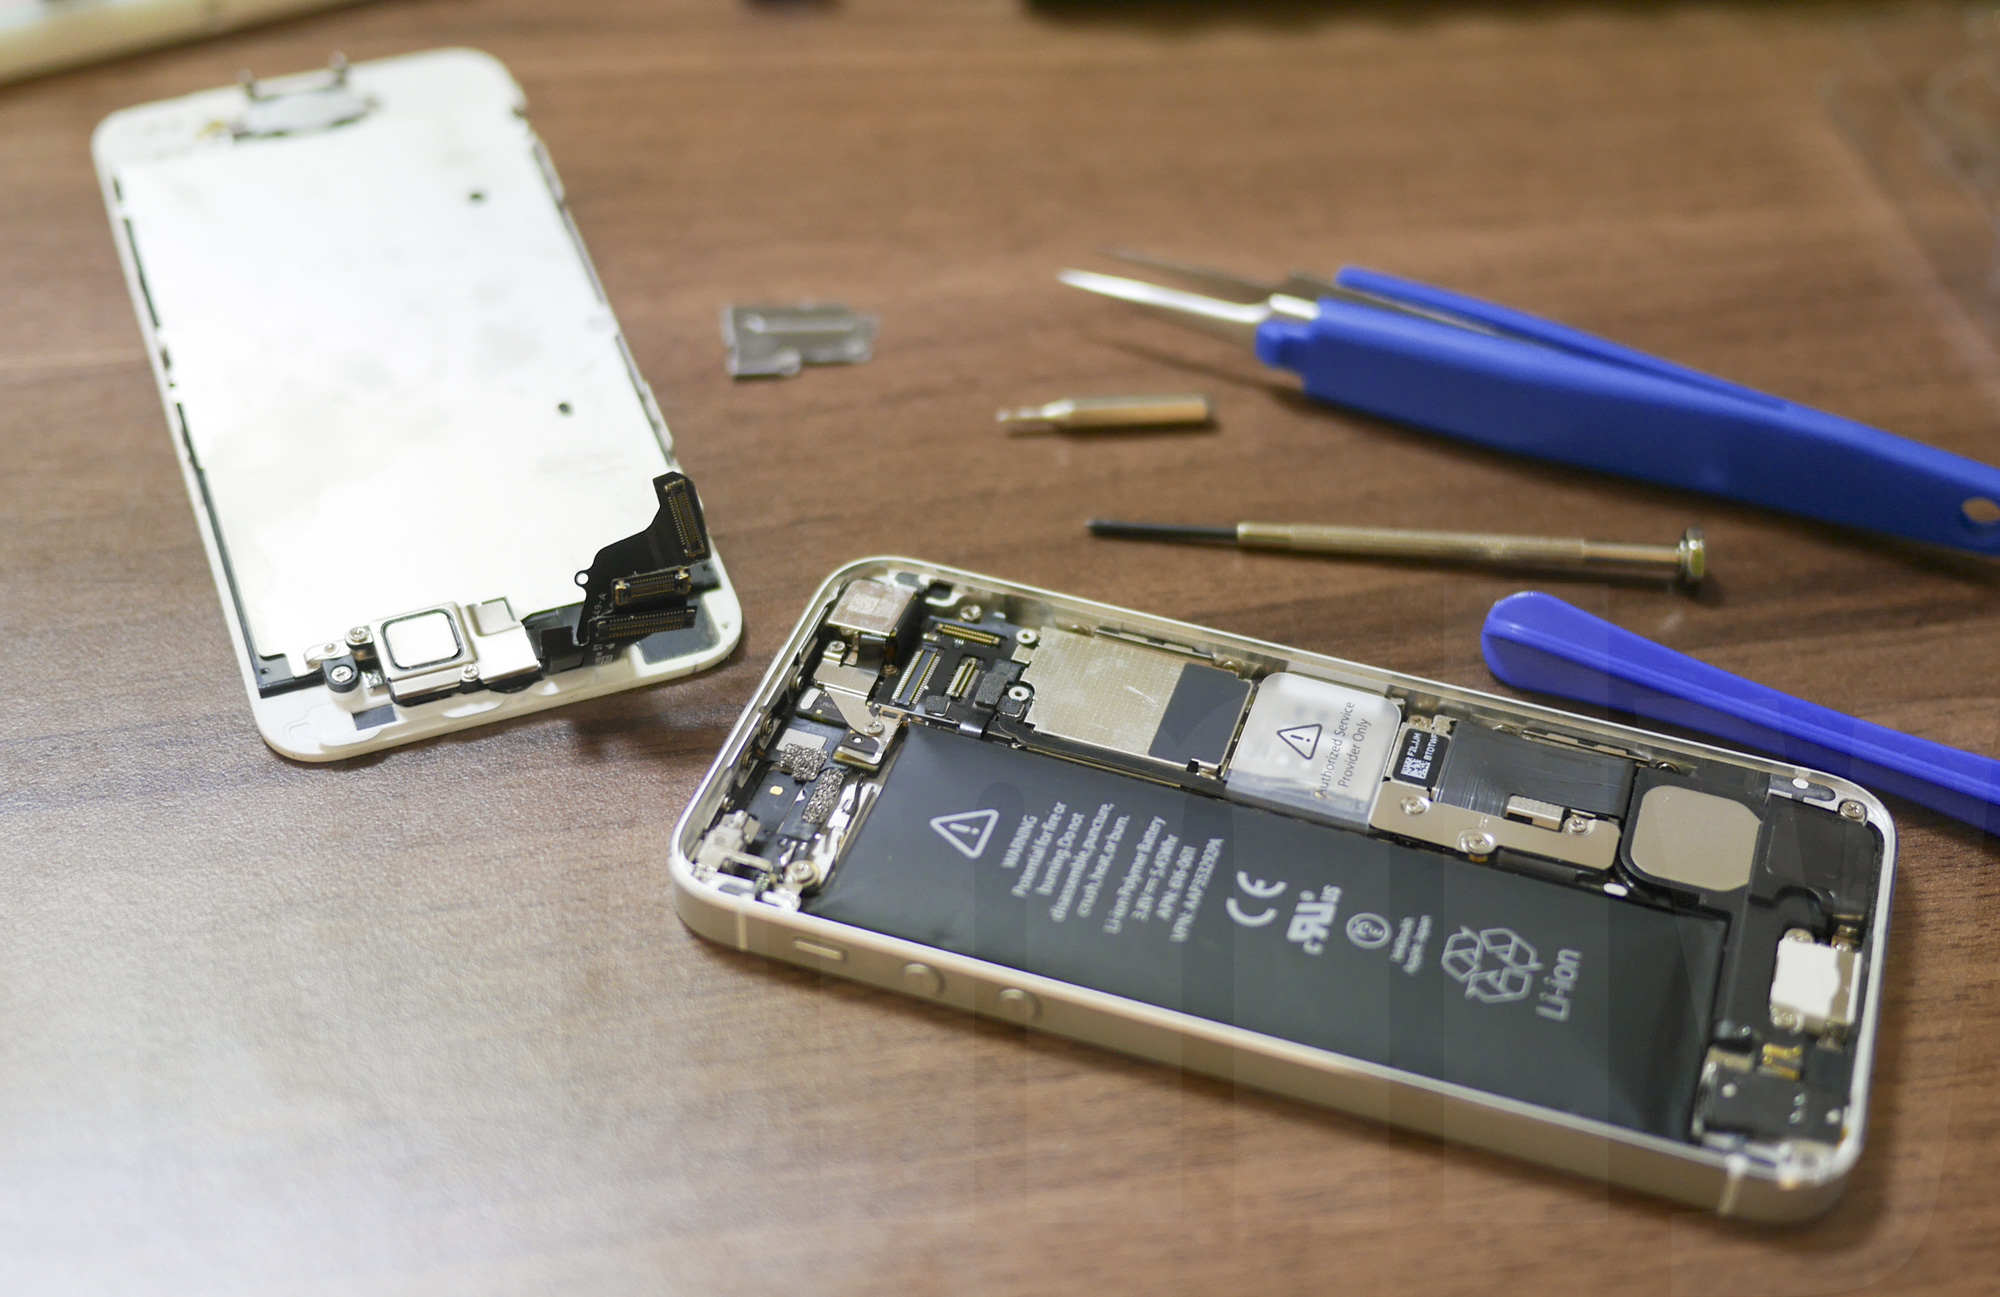 iPhone 5 Battery replacement: front cover is removed